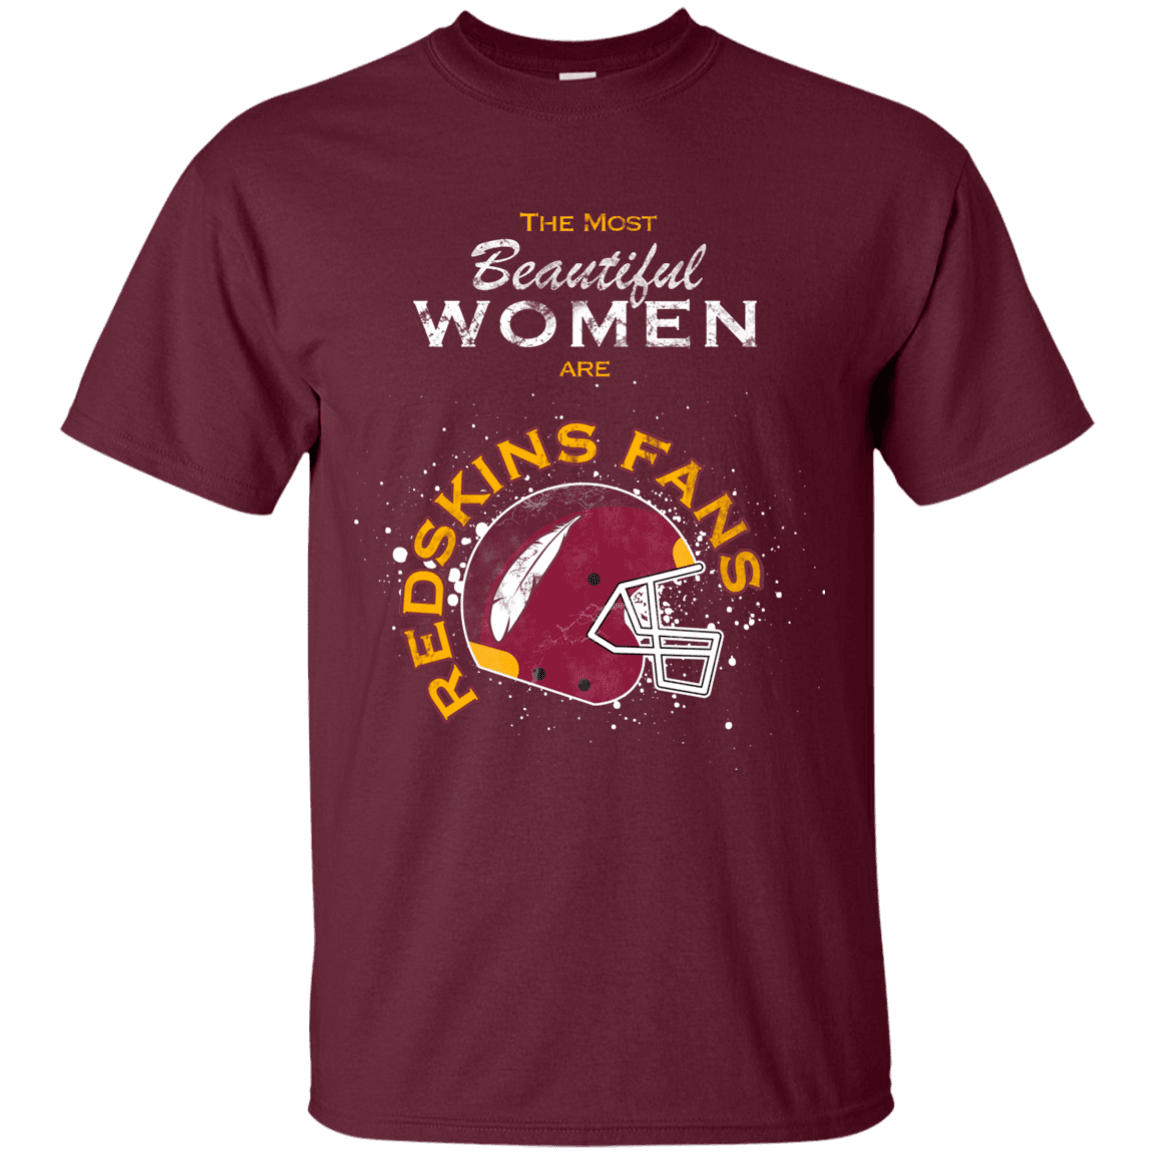 Most Beautiful Women Are Redskins Fans T-Shirt - 22-96-8222114-230